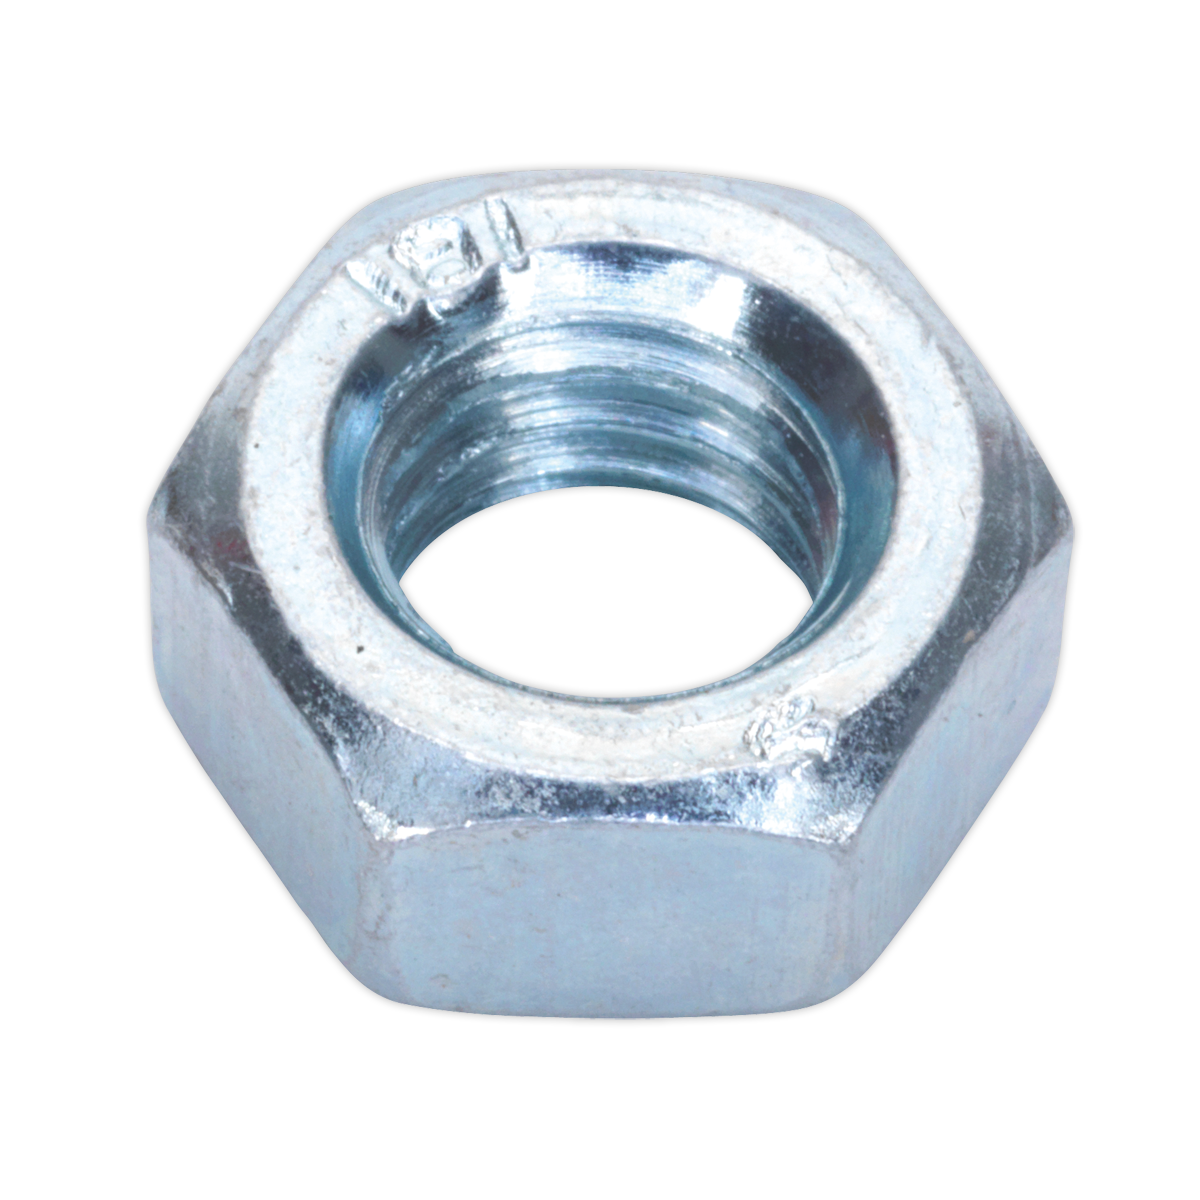 Steel Nut DIN 934 - M8 - Pack of 100 - SN8 - Farming Parts